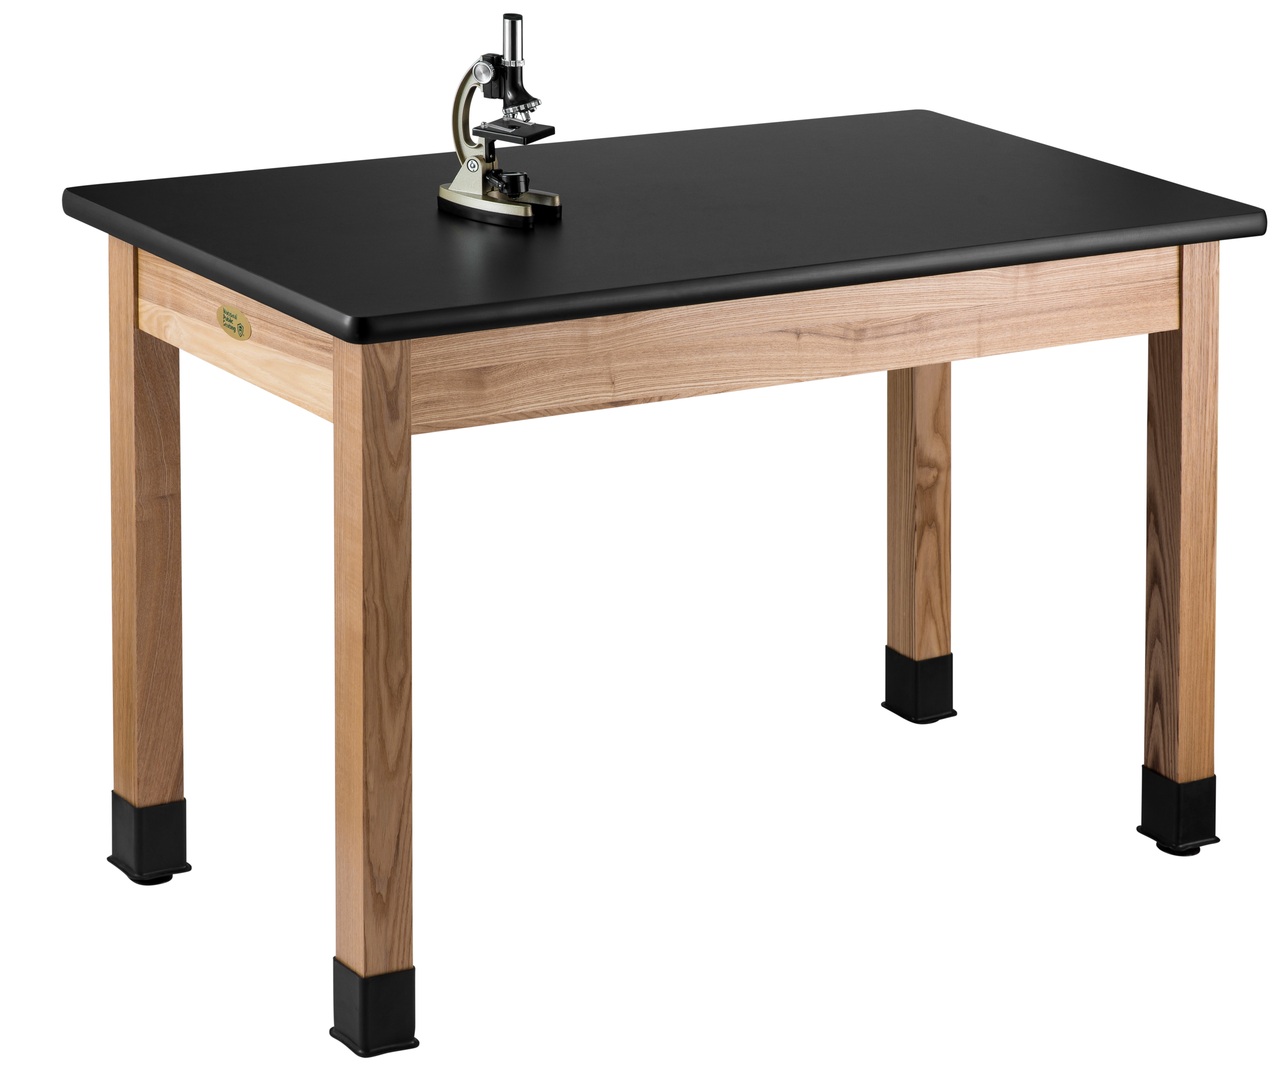 NPS Wood Science Lab Table -  42"x60"x36" -  HPL Top - Black Top and Ash Leg